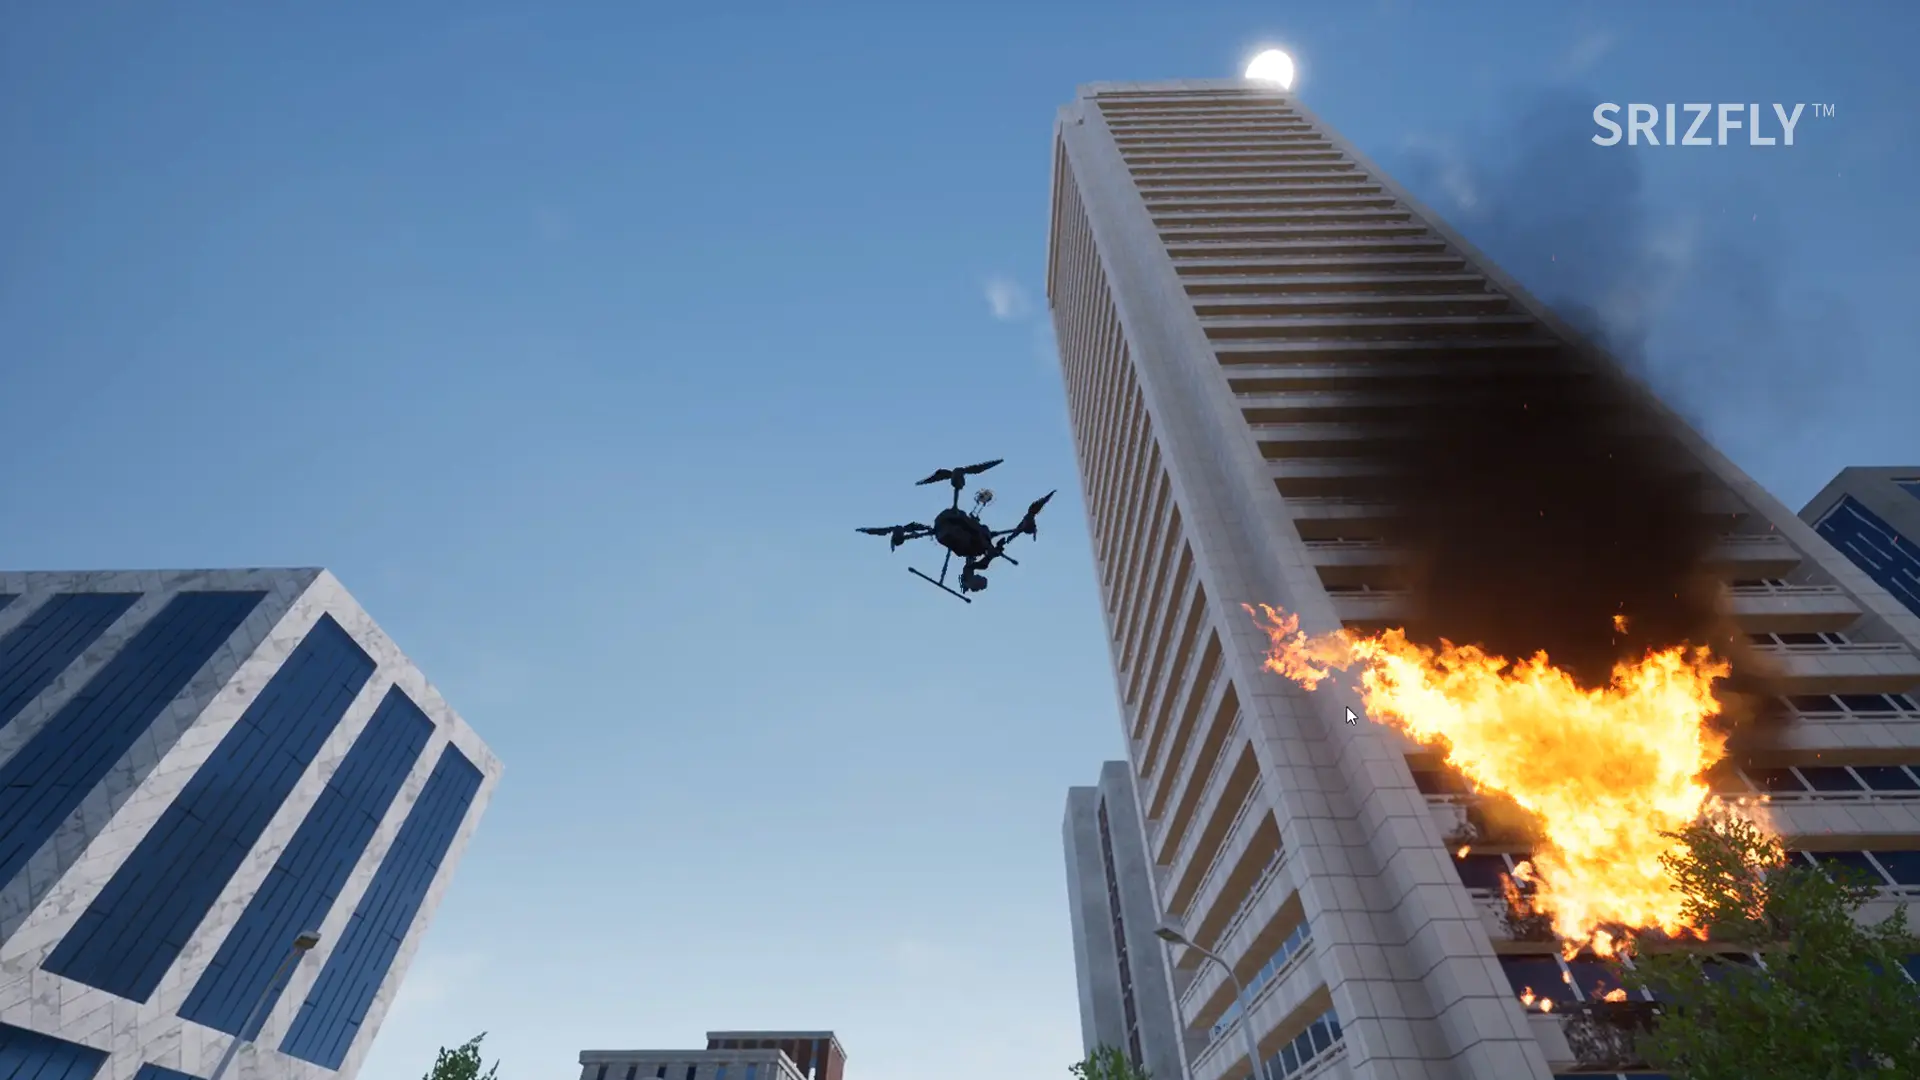 SRIZFLY launches an emergency fire-fighting drone simulation system, focusing on fire-fighting drone tactical drills and skills training